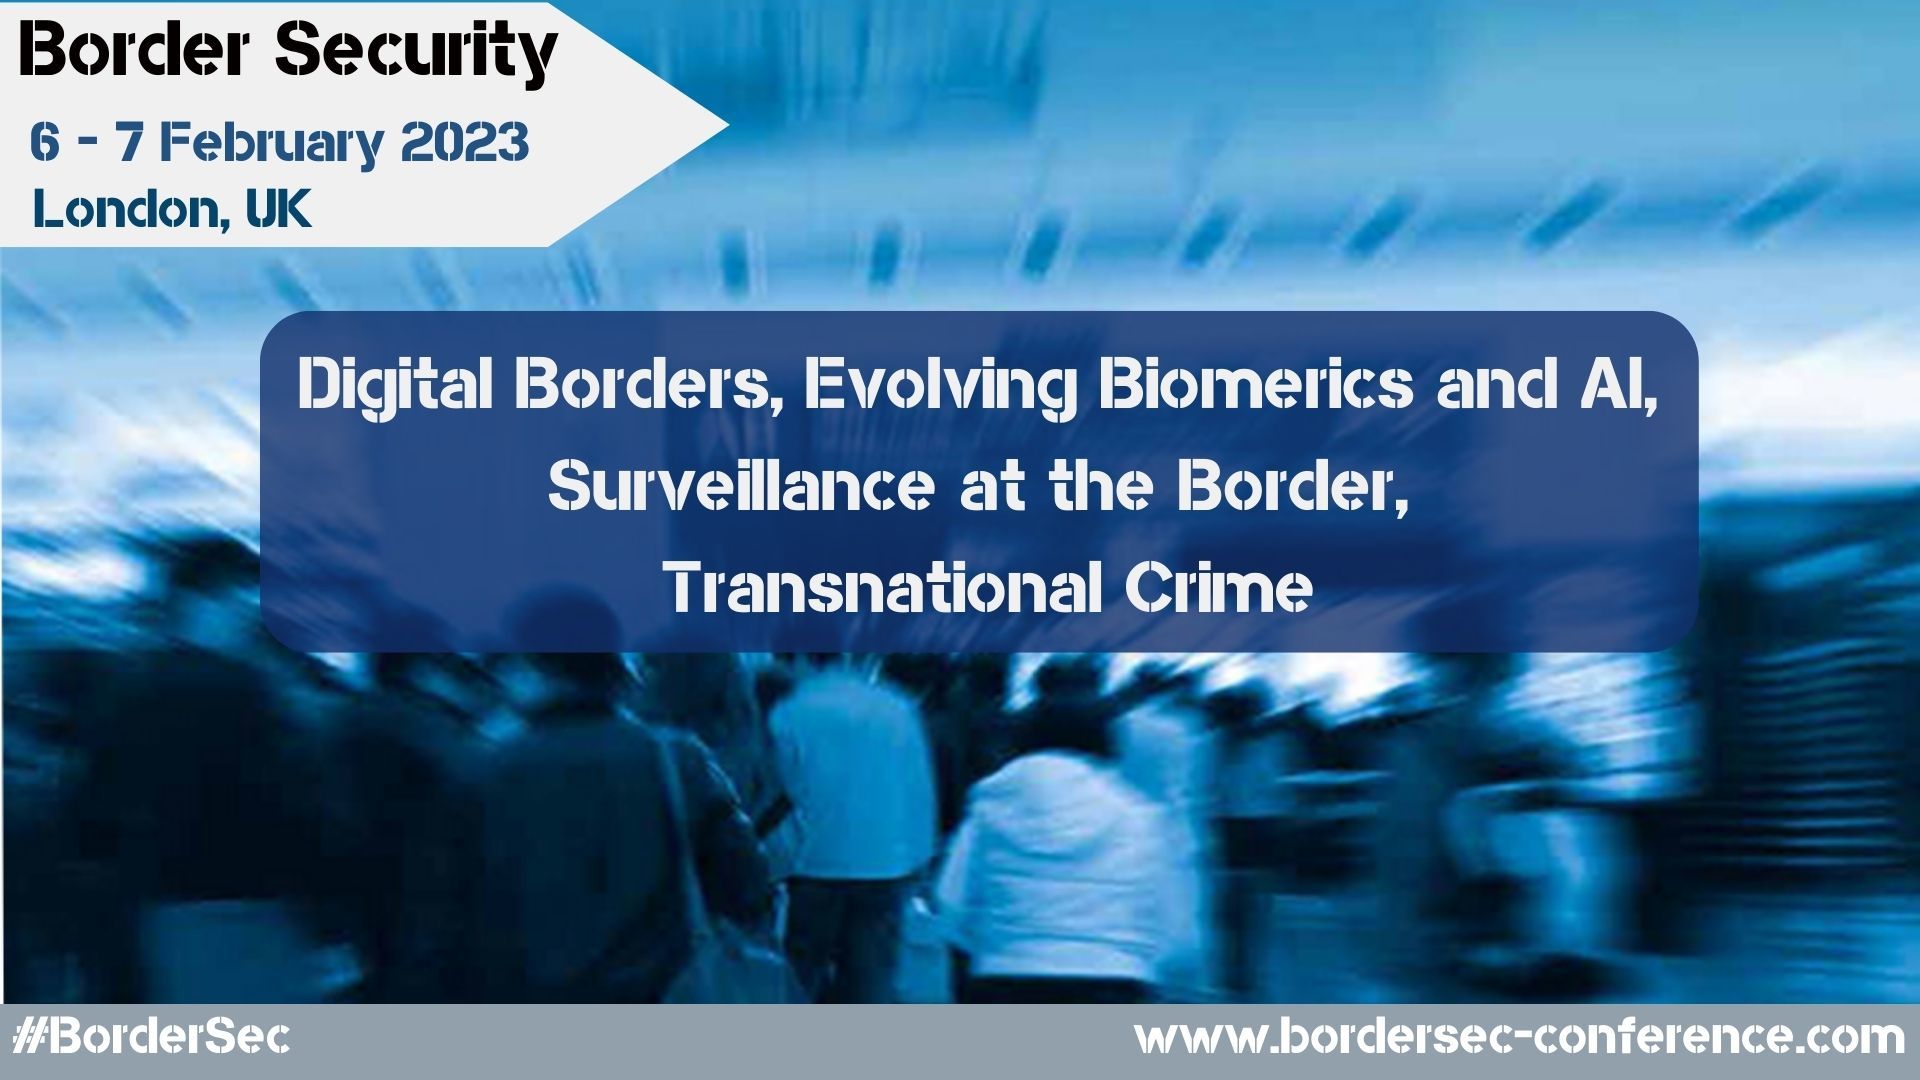 15th Annual Border Security Conference